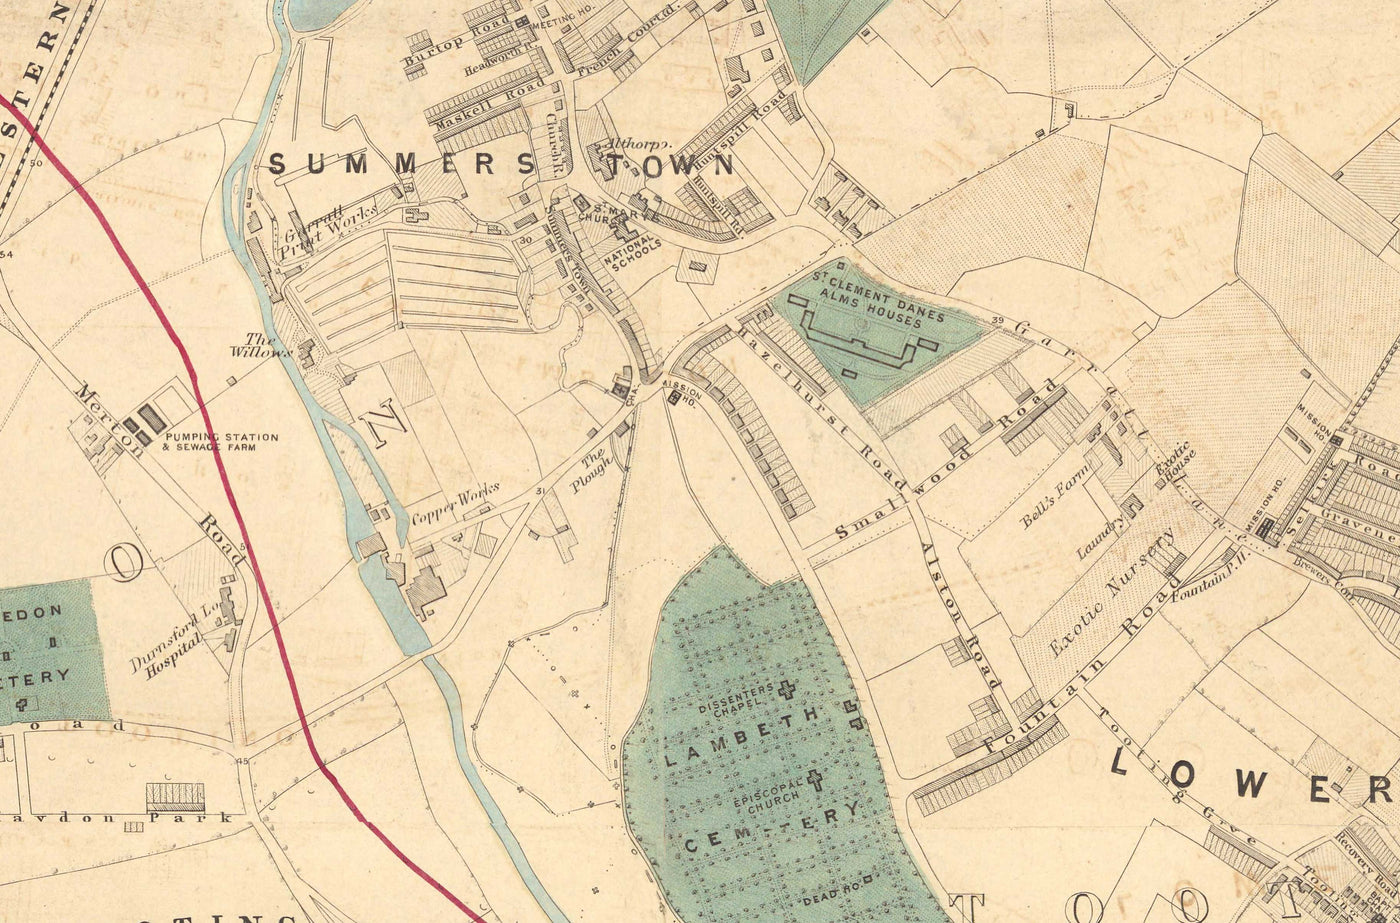 Old Colour Map of South West London, 1891 - Wimbledon, Merton, Summerstown - SW19, SW17 SW20